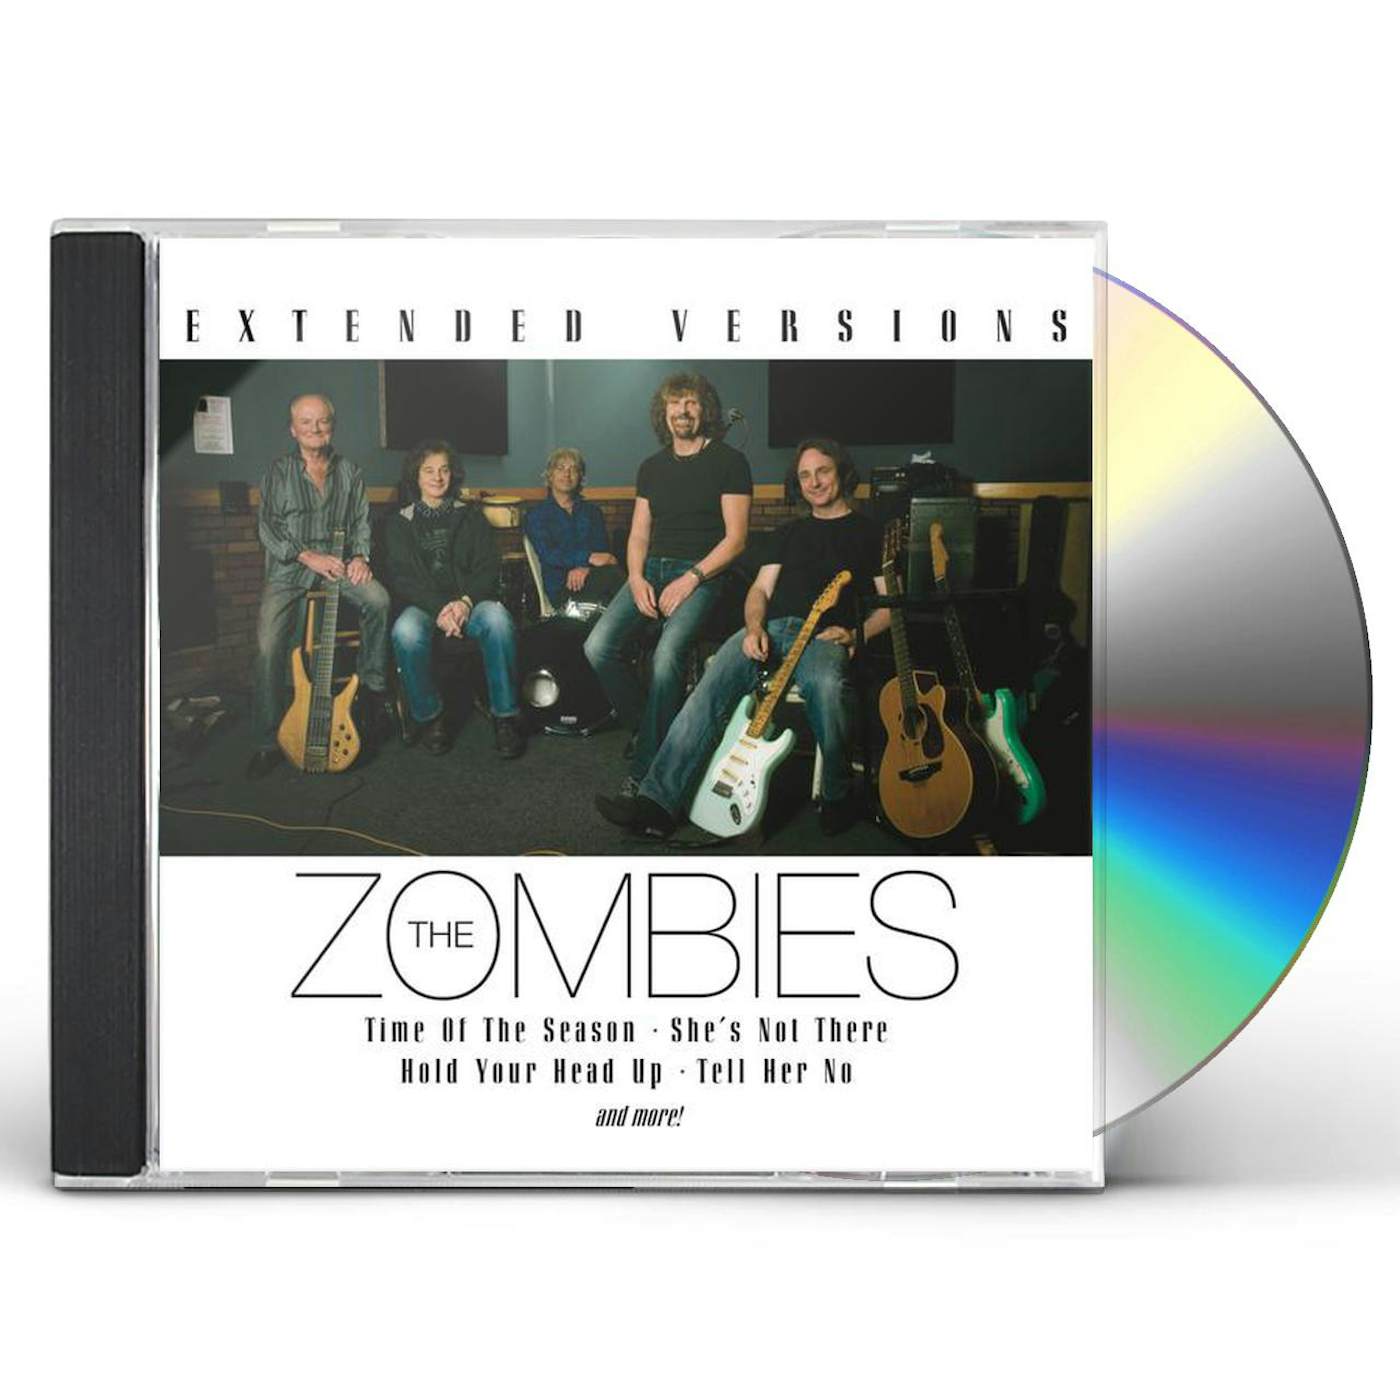 The Zombies EXTENDED VERSIONS CD